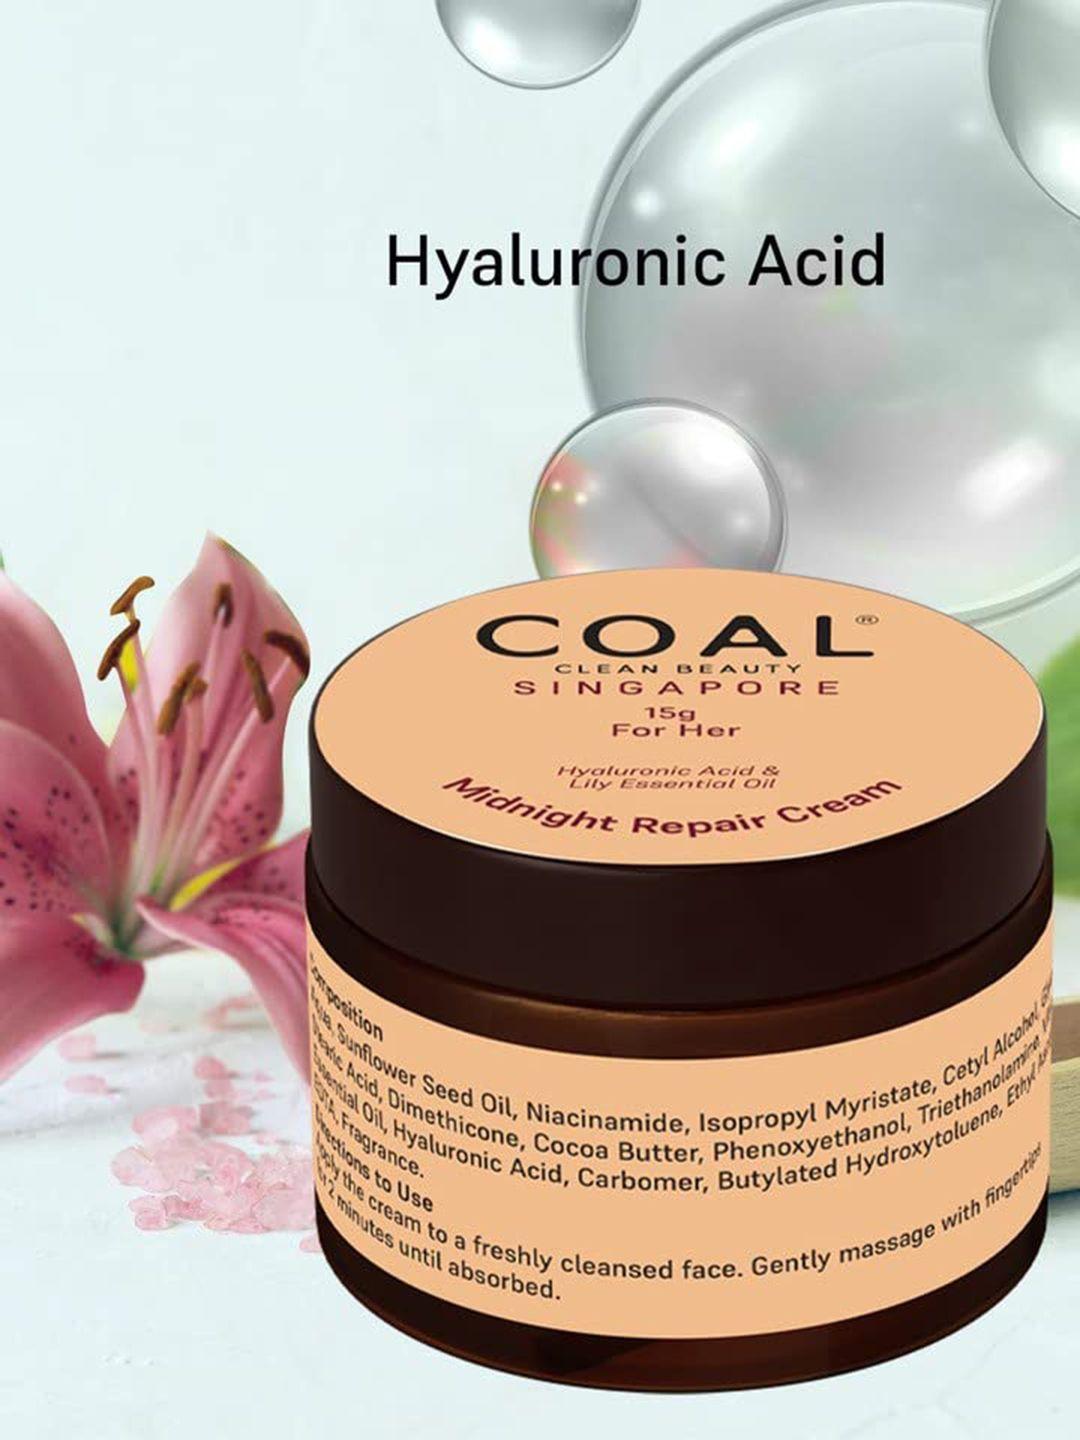 coal clean beauty singapore midnight repair cream with hyaluronic acid - 15g